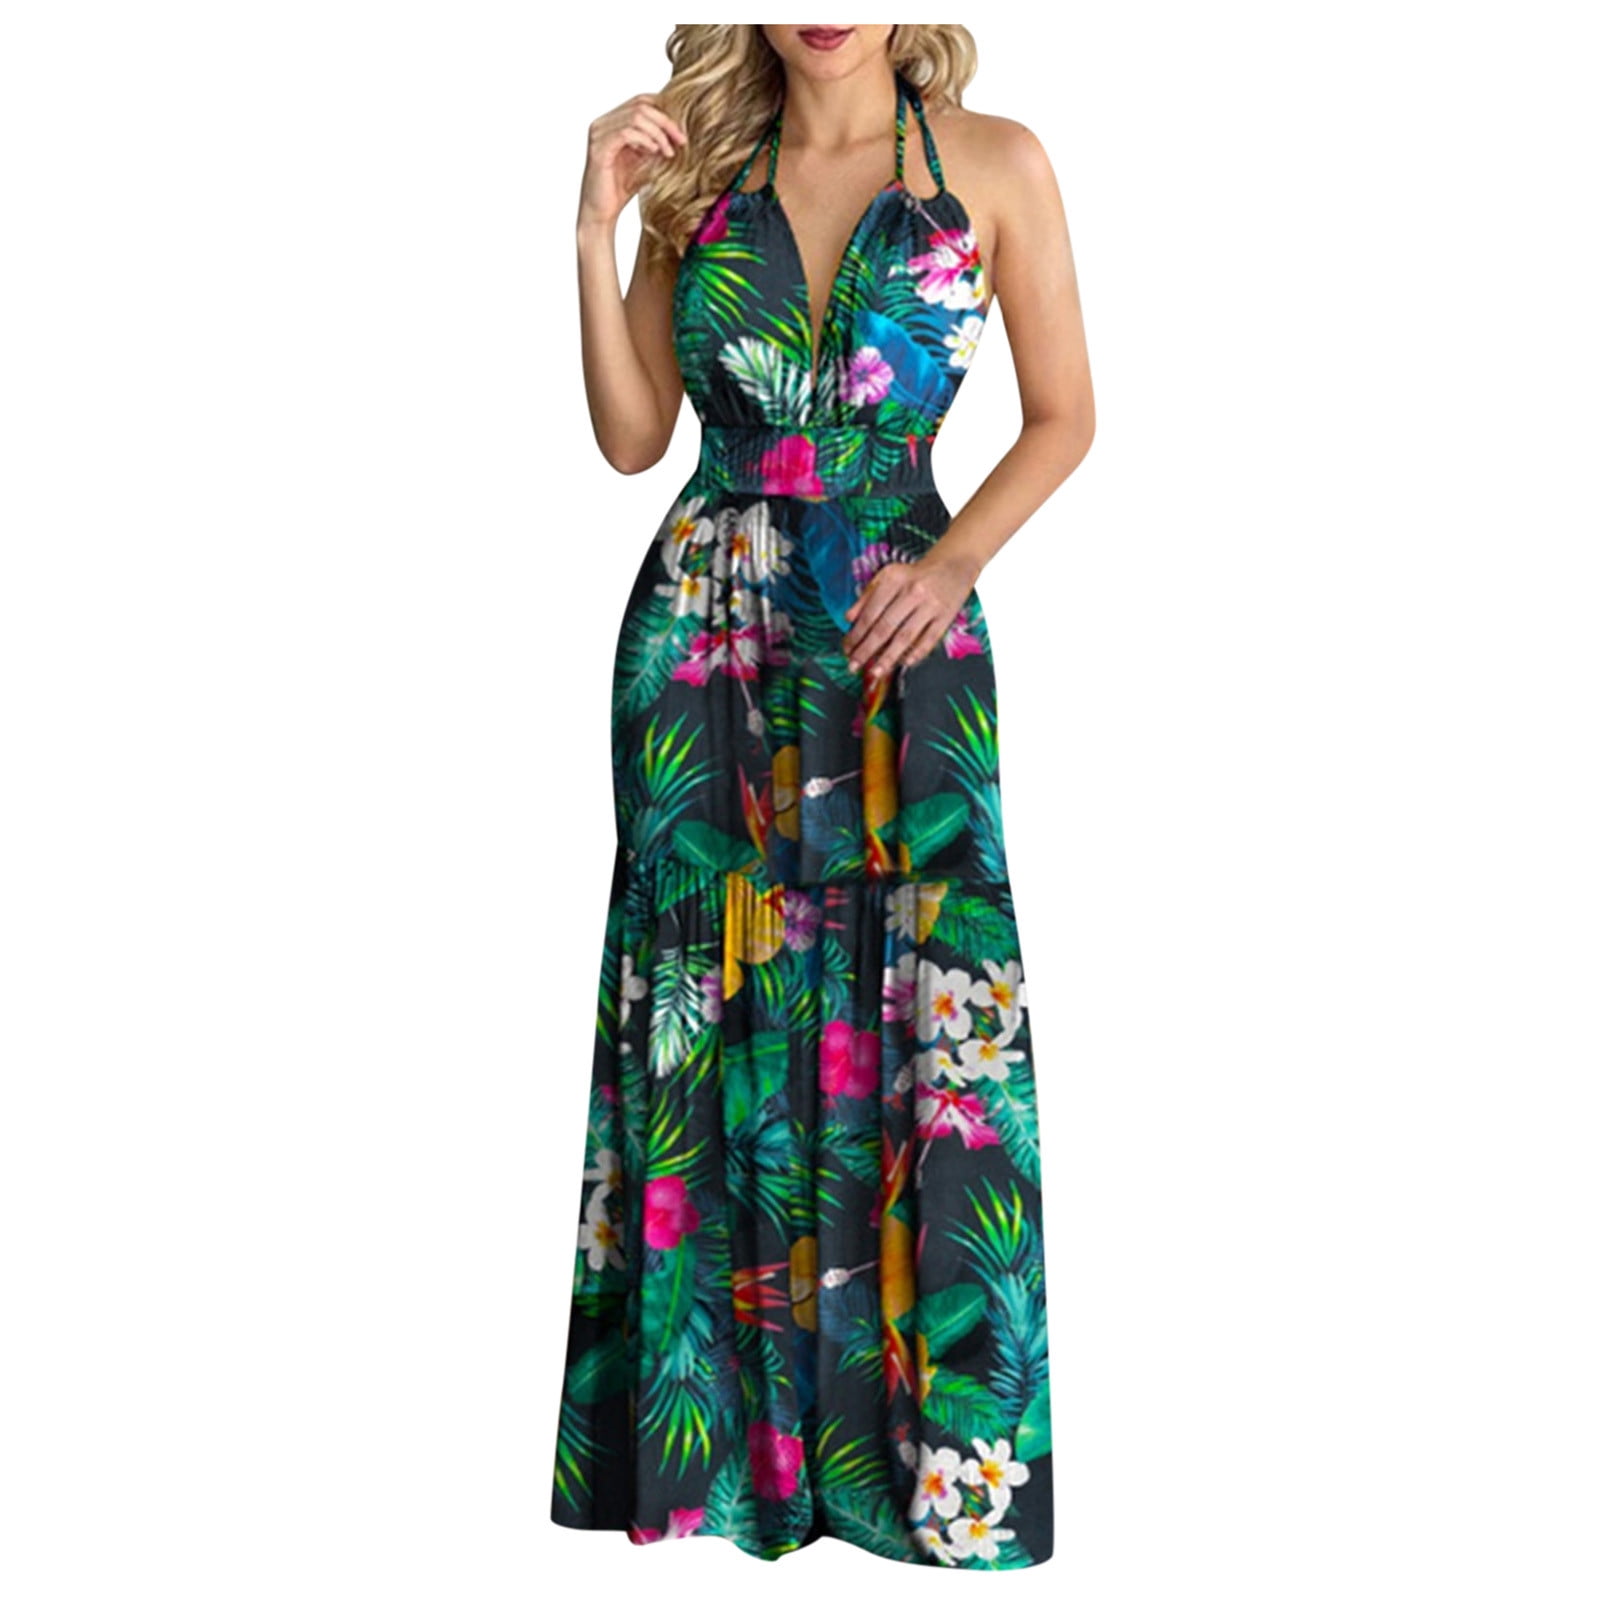 Giftesty Dresses for Women Clearance Under $10,Women Tropical Print ...